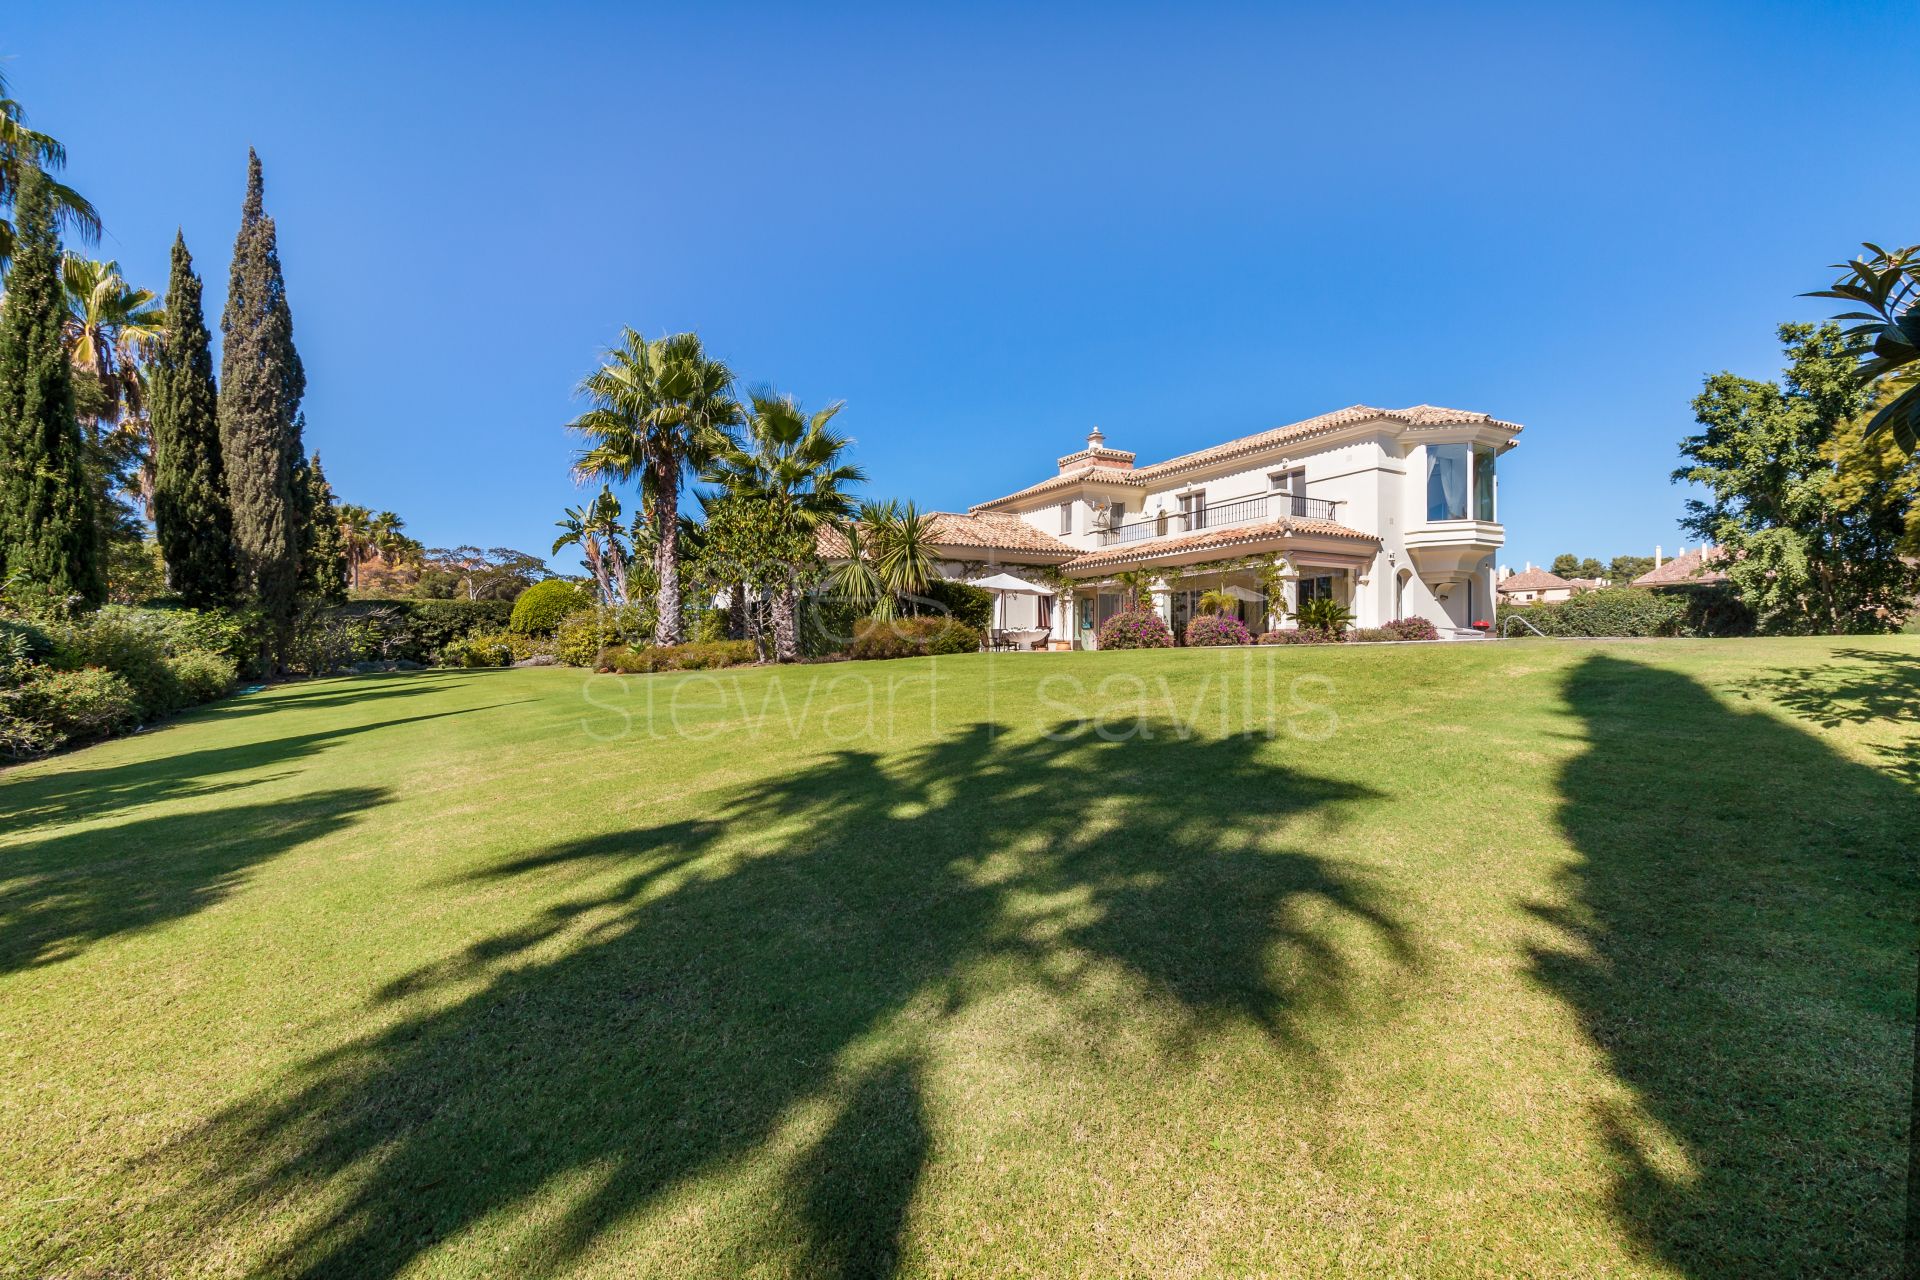 Great family home on an elevated plot in the F zone of Sotogrande Alto